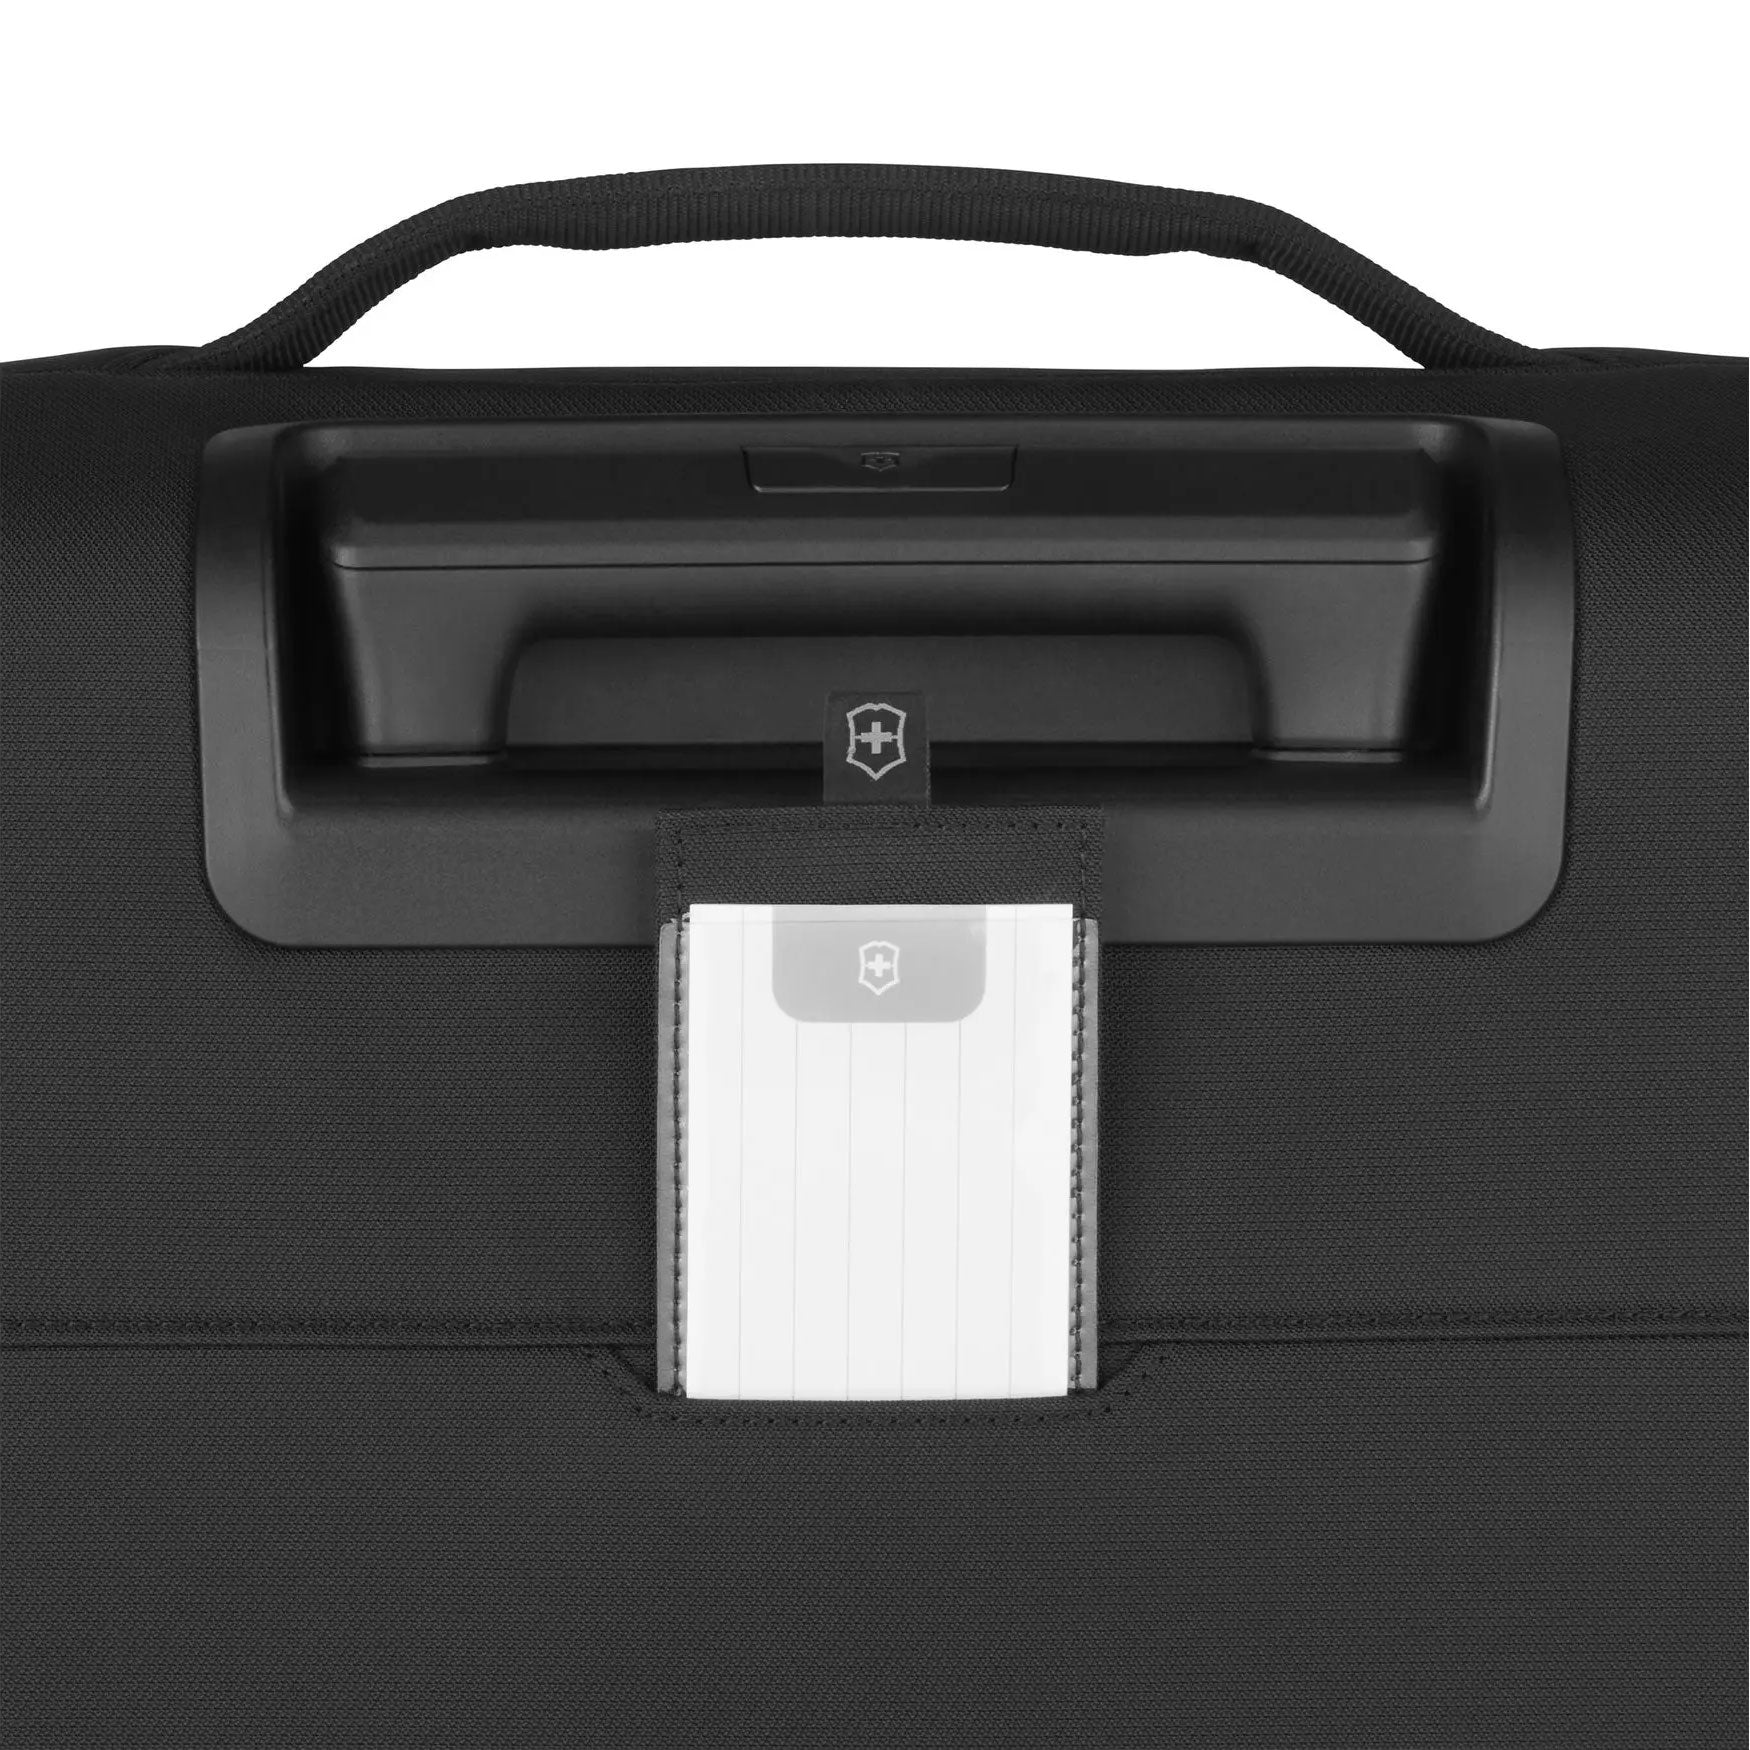 Victorinox  Connex Frequent Flyer Hardside – Travel and Business Store